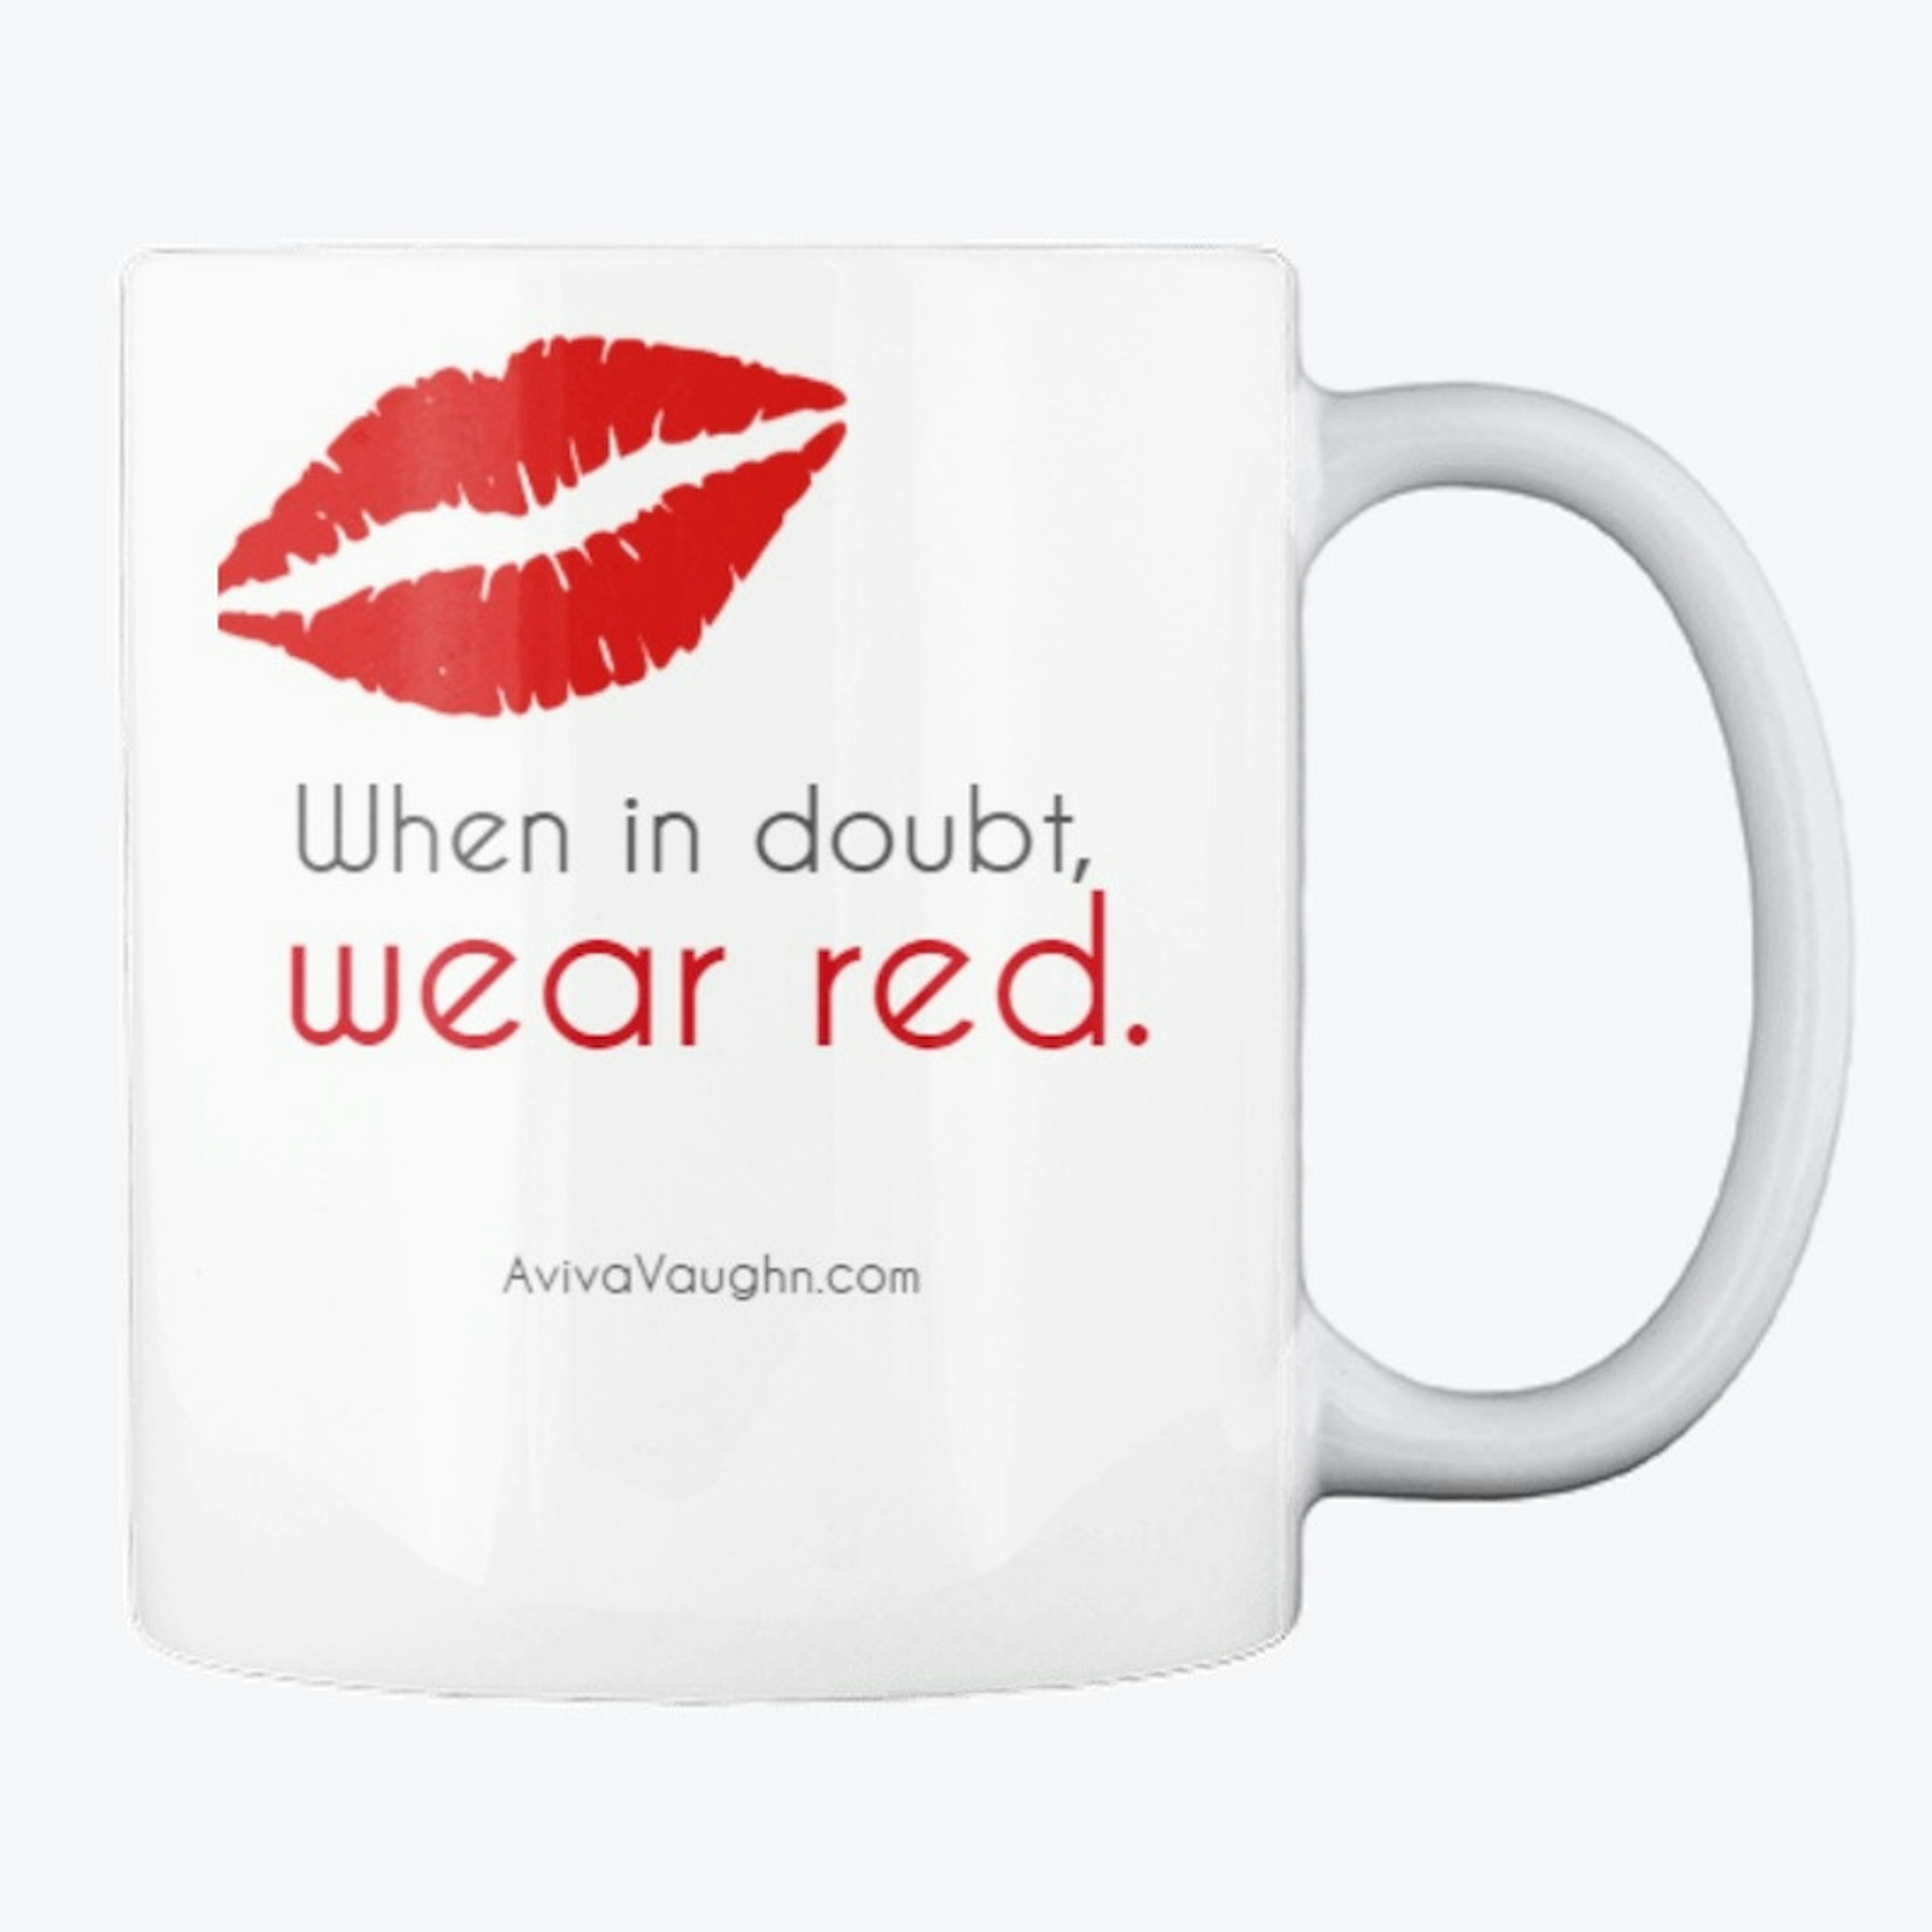 Wear Red (click for color options)